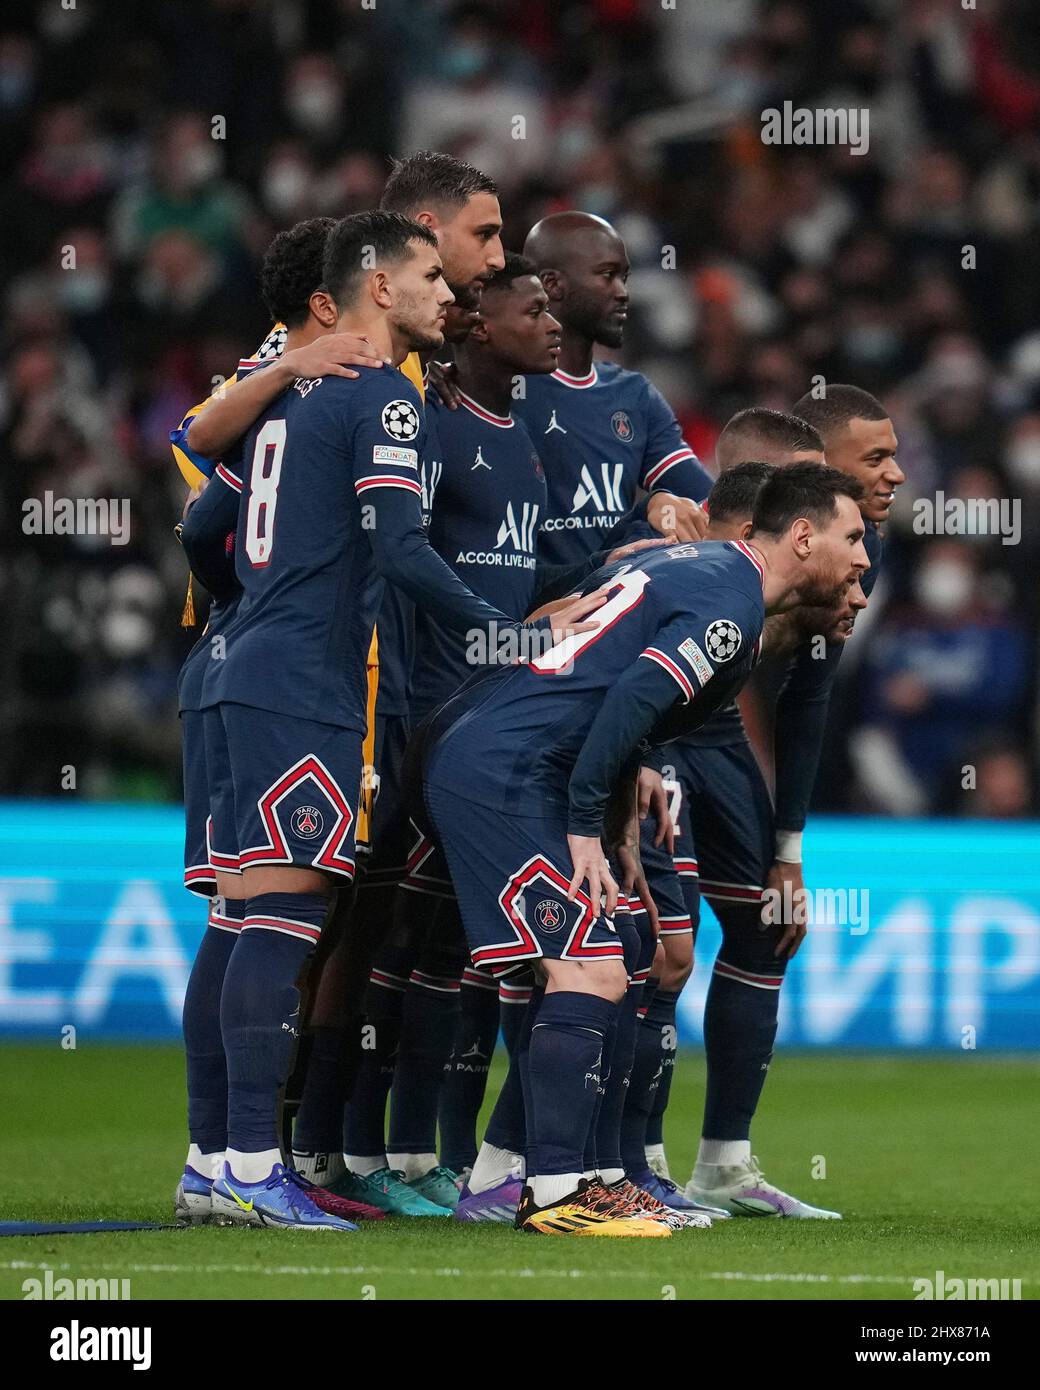 Madrid, Spain. March 09, 2022, PSG Team group during the UEFA Champions  League match between Real Madrid and Paris Saint Germain, played at  Santiago Bernabeu Stadium on March 09, 2022 in Madrid,